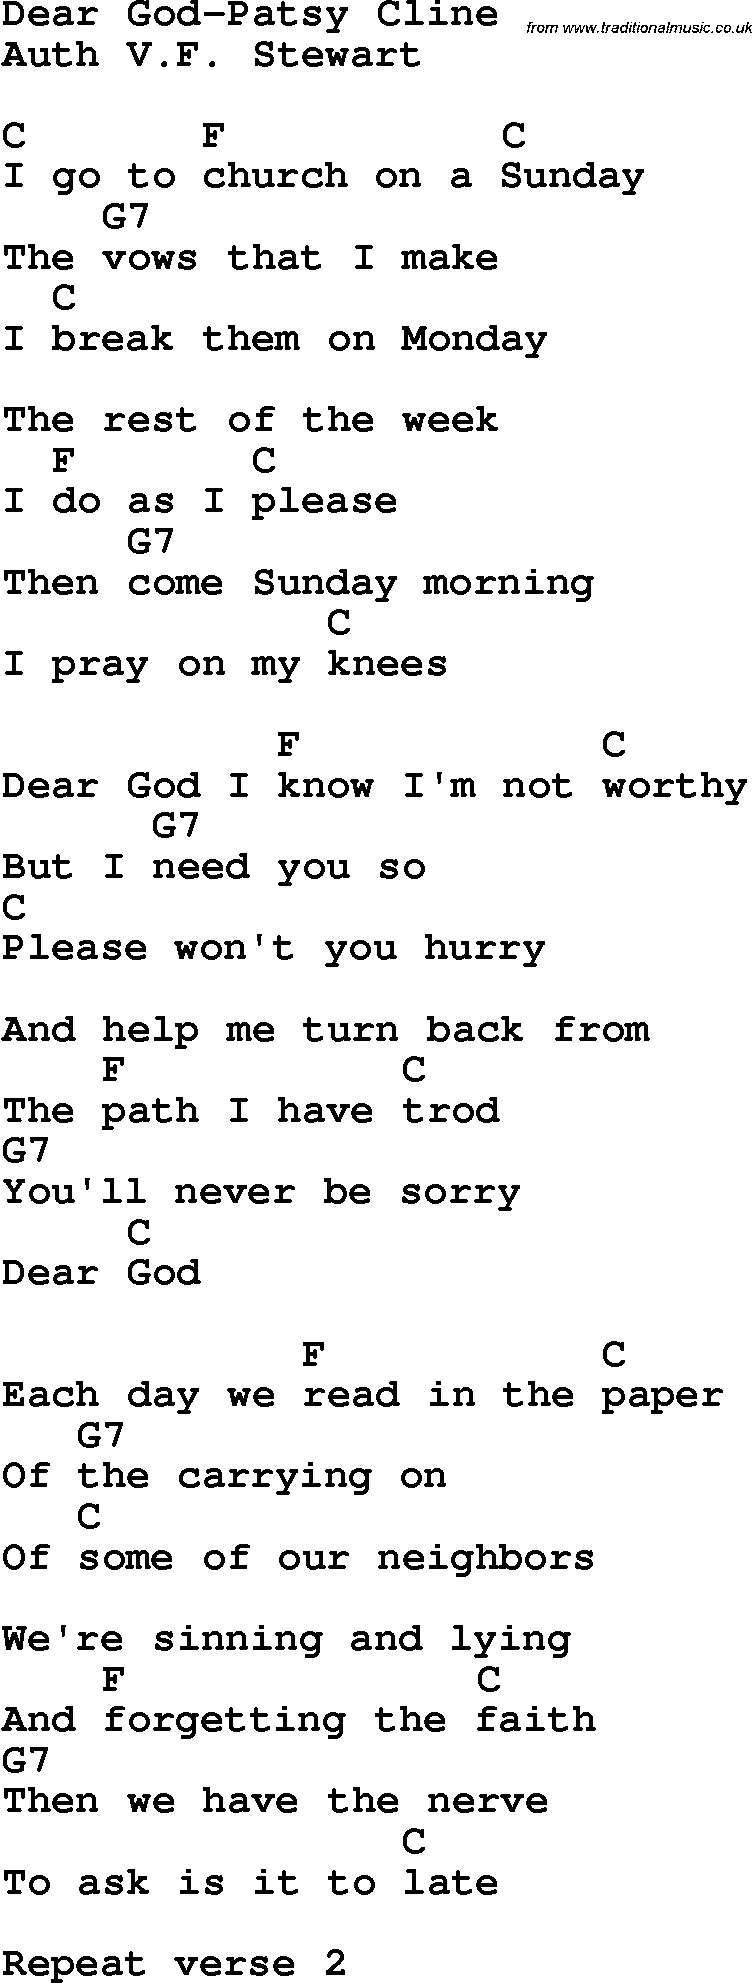 Country, Southern and Bluegrass Gospel Song Dear God-Patsy Cline lyrics and chords